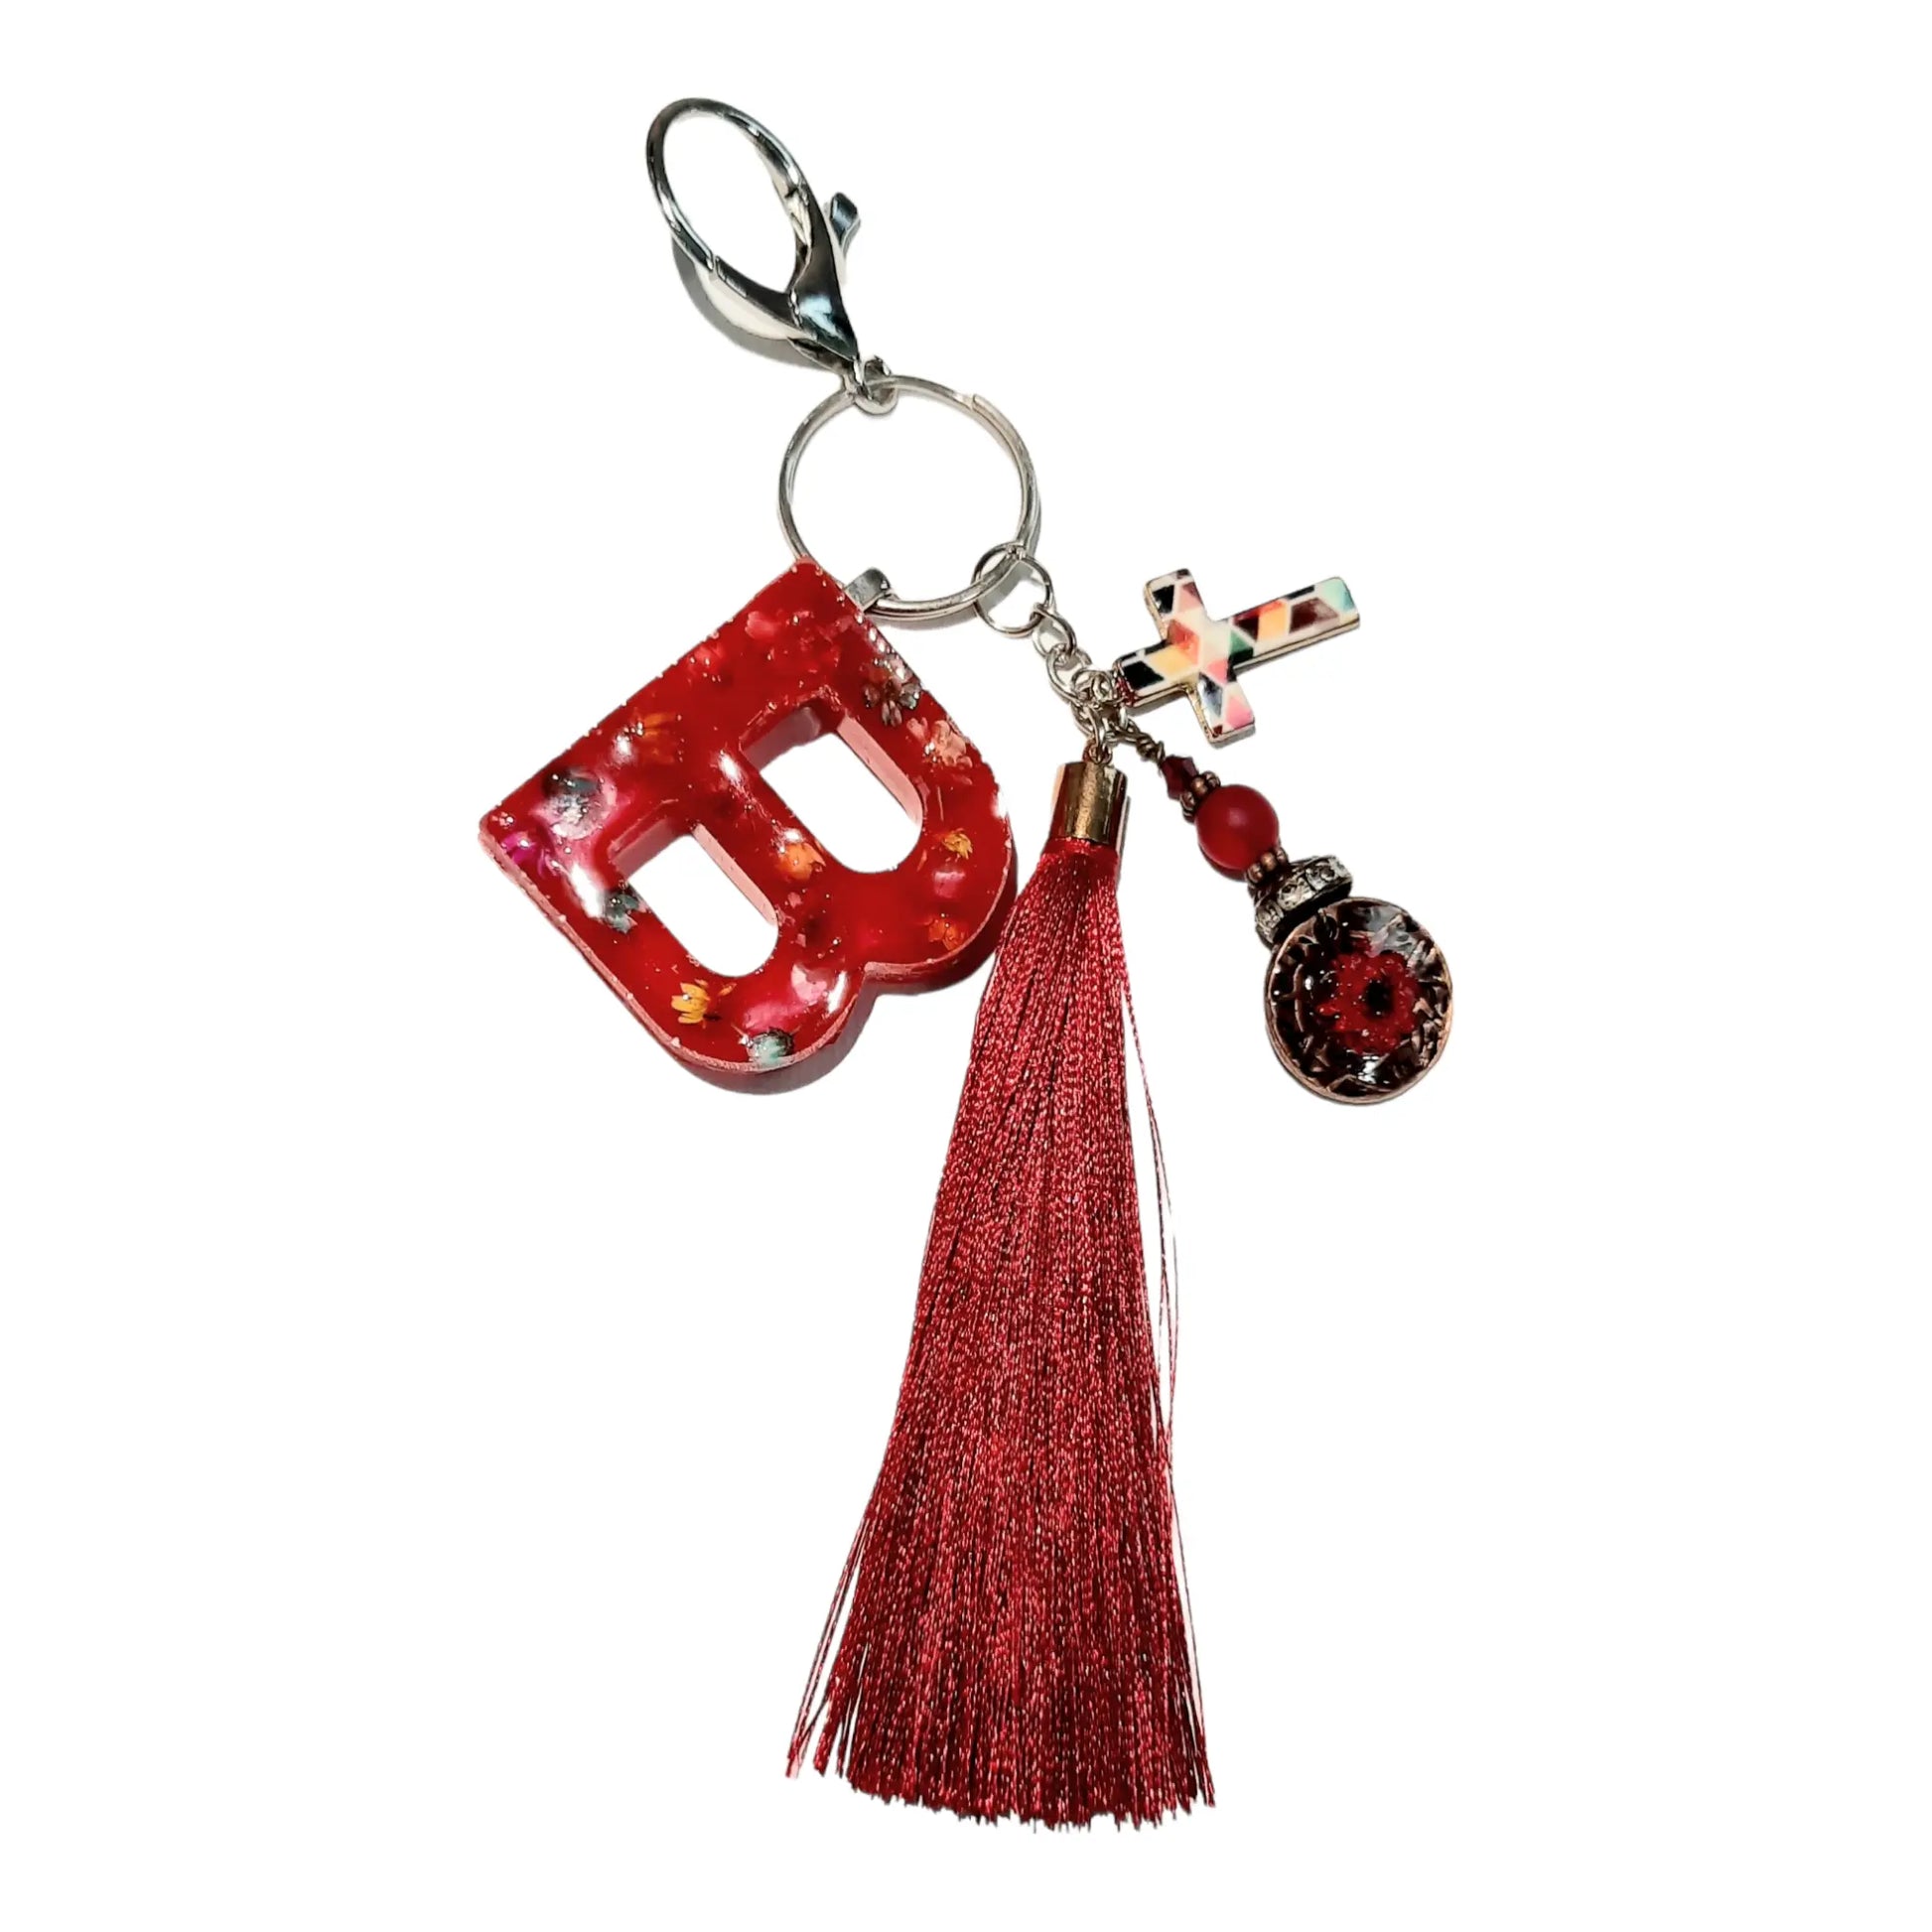 Letter initial resin dried flowers key chain accessories - Image #3